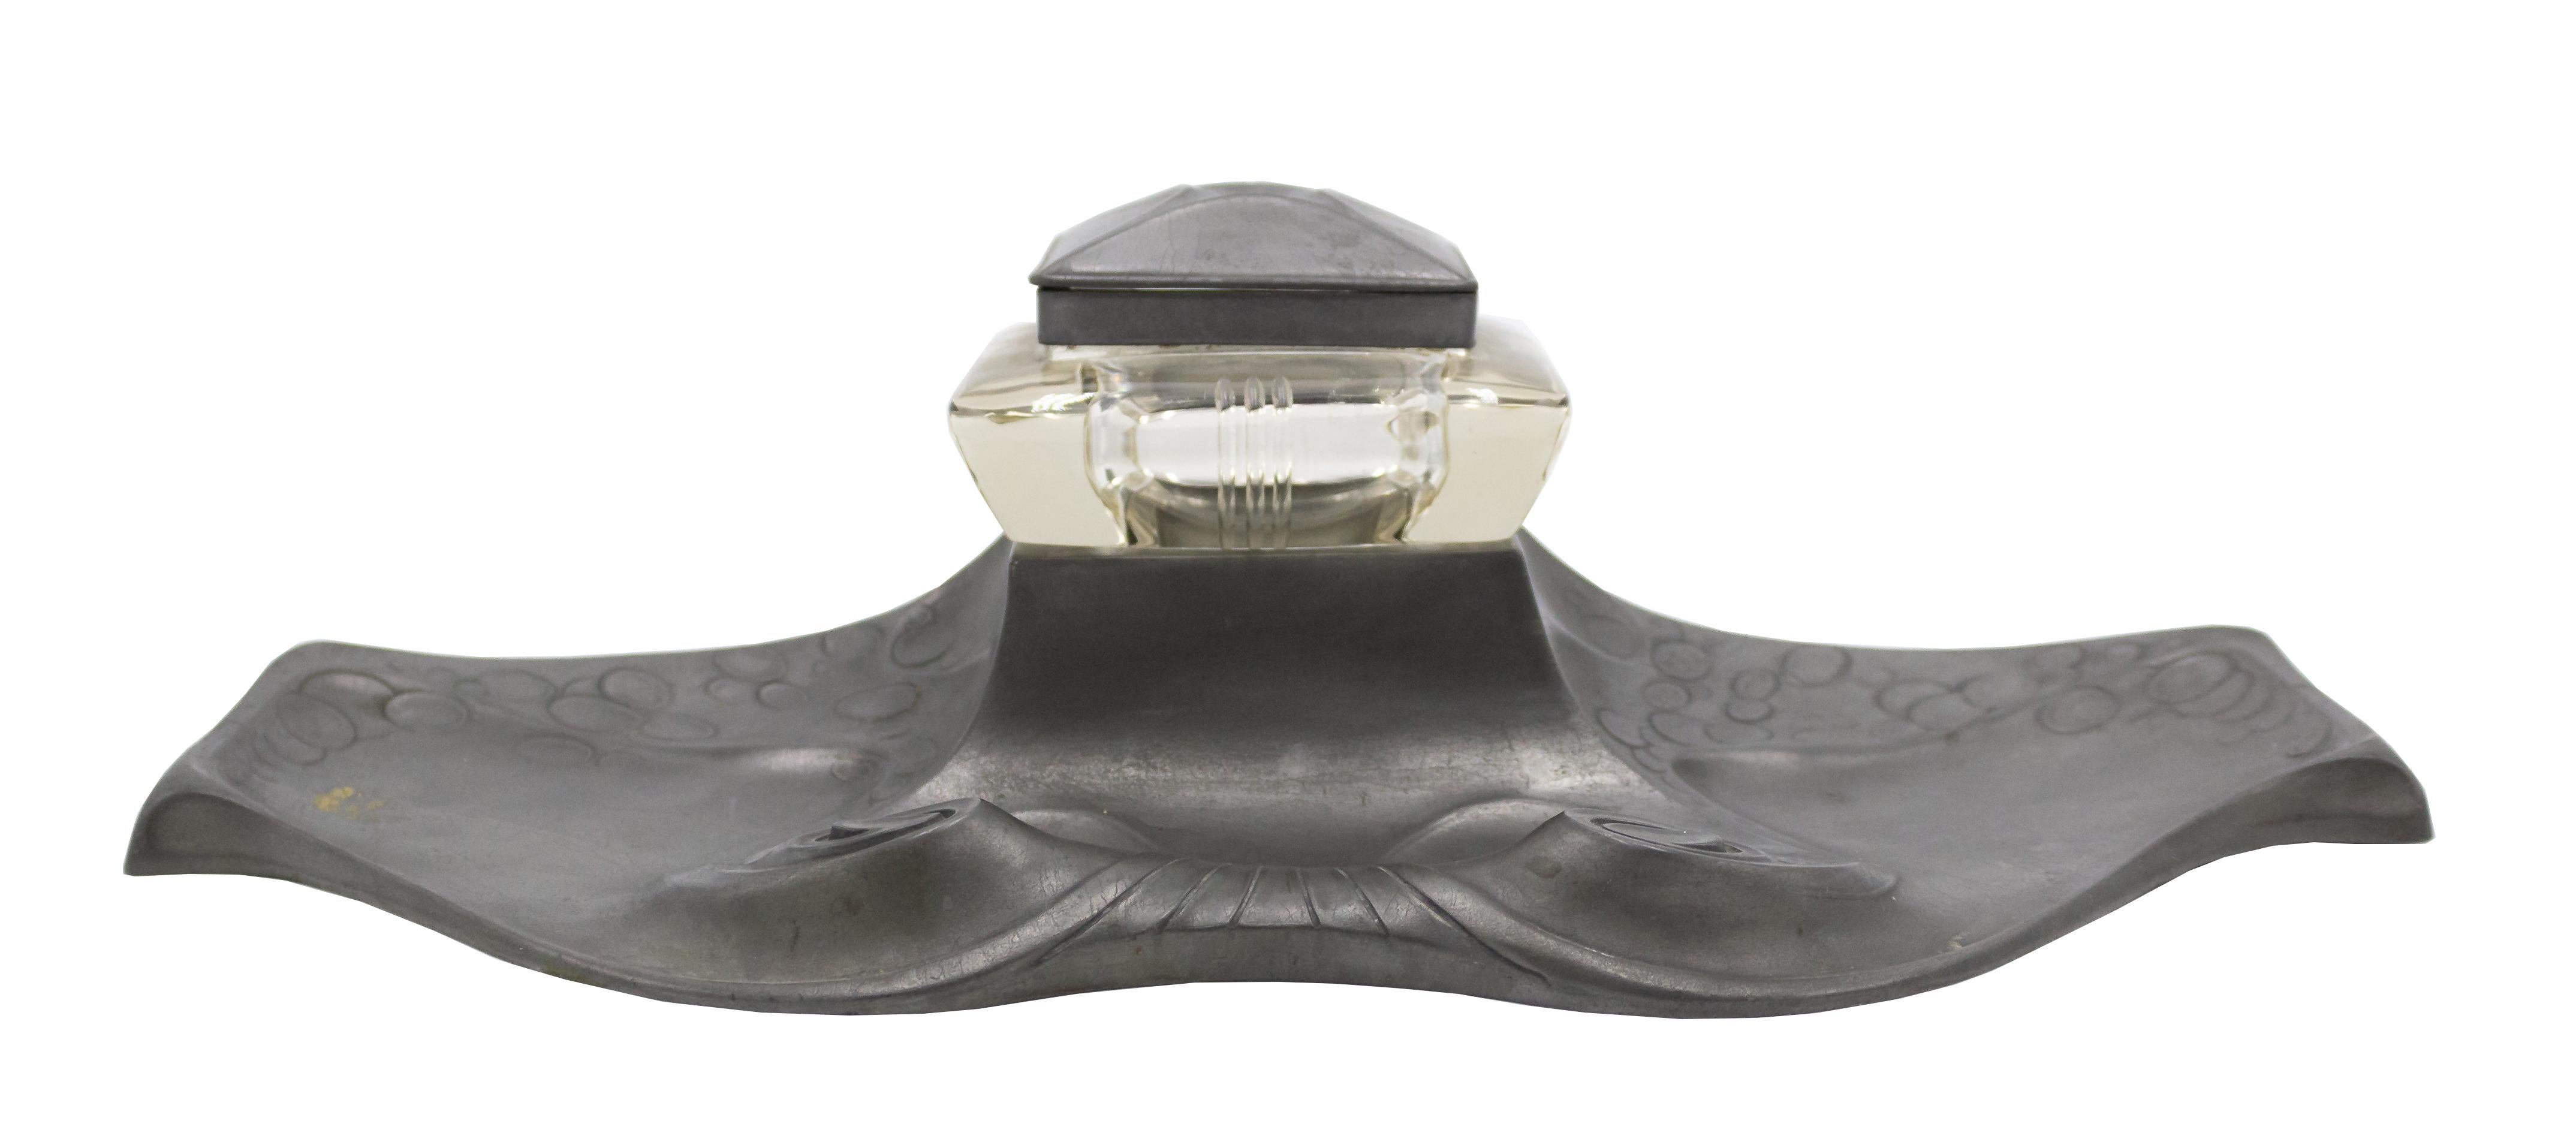 German Art Nouveau pewter inkstand with scroll designs supporting a square cut glass inkwell with a square molded pewter lid.
 